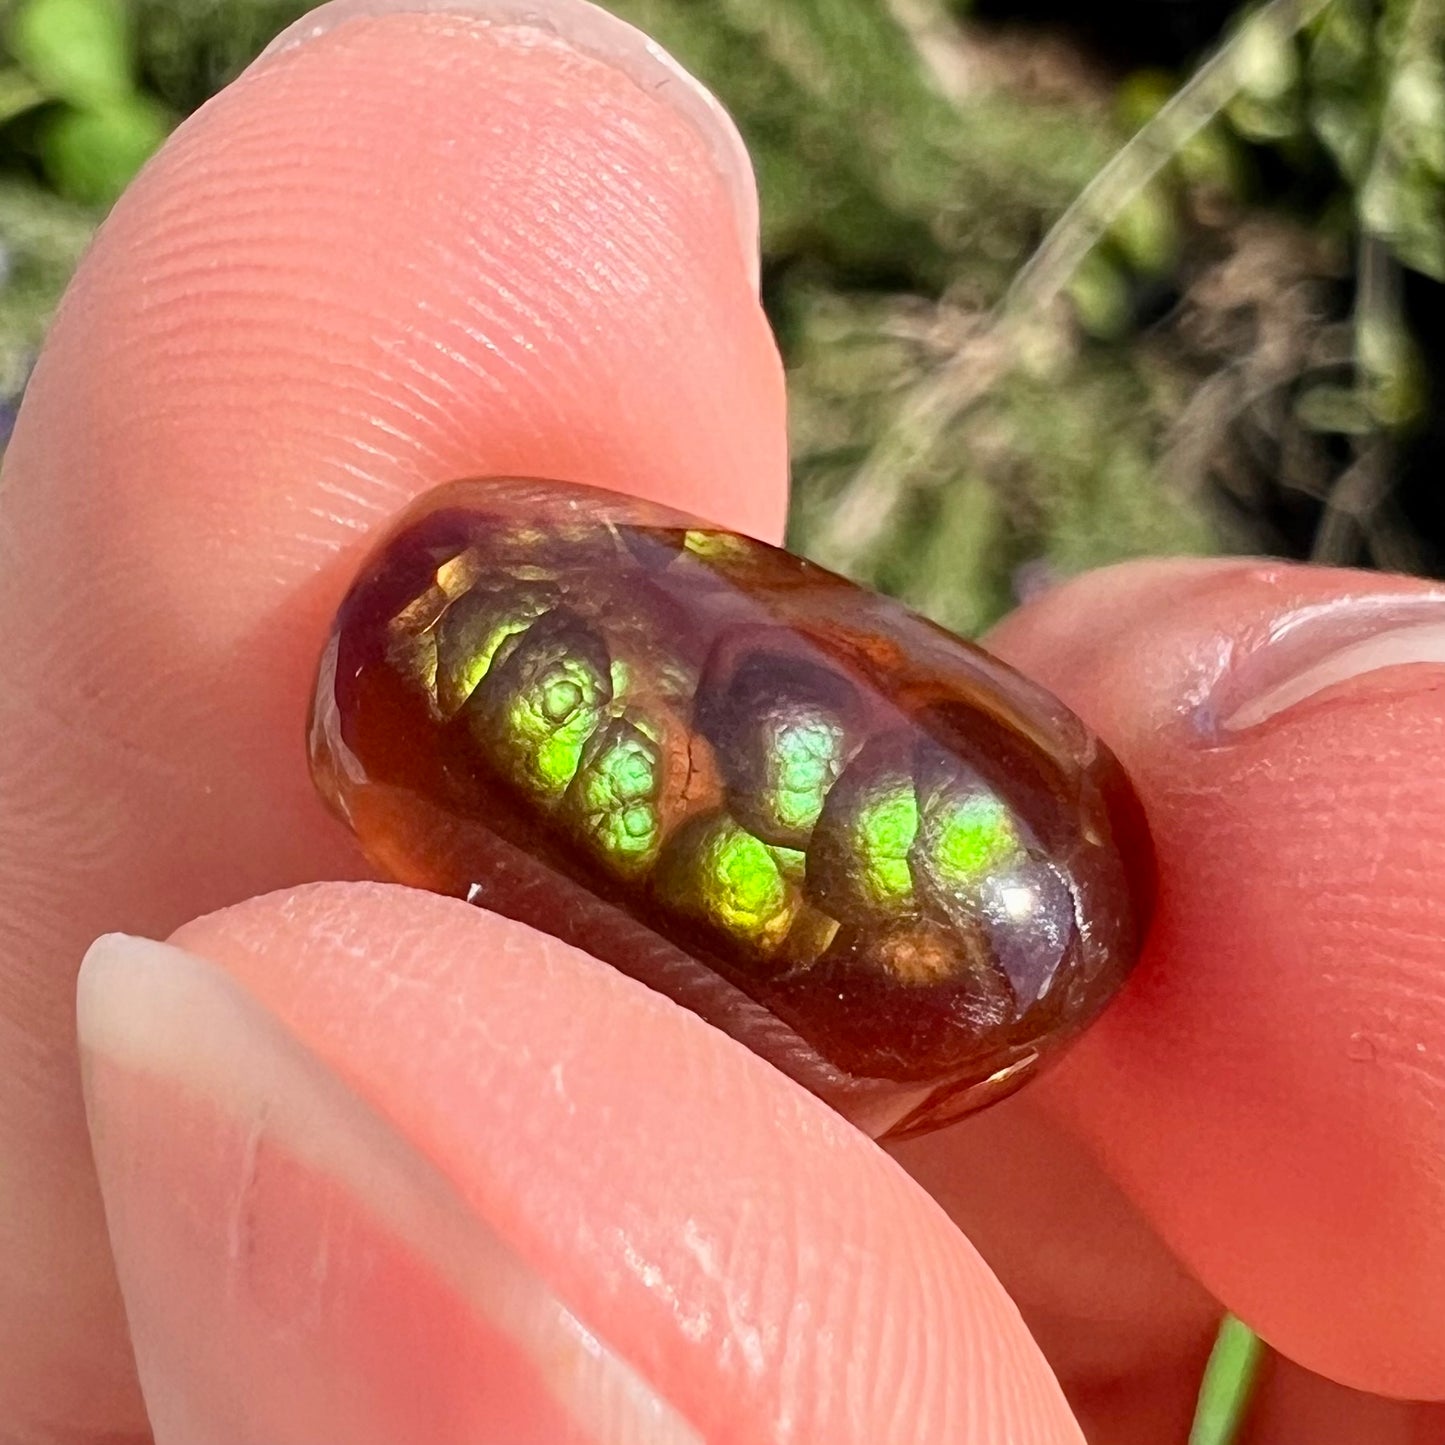 A loose, cabochon cut Mexican fire agate stone.  The stone's colors are predominantly bright green and blue.